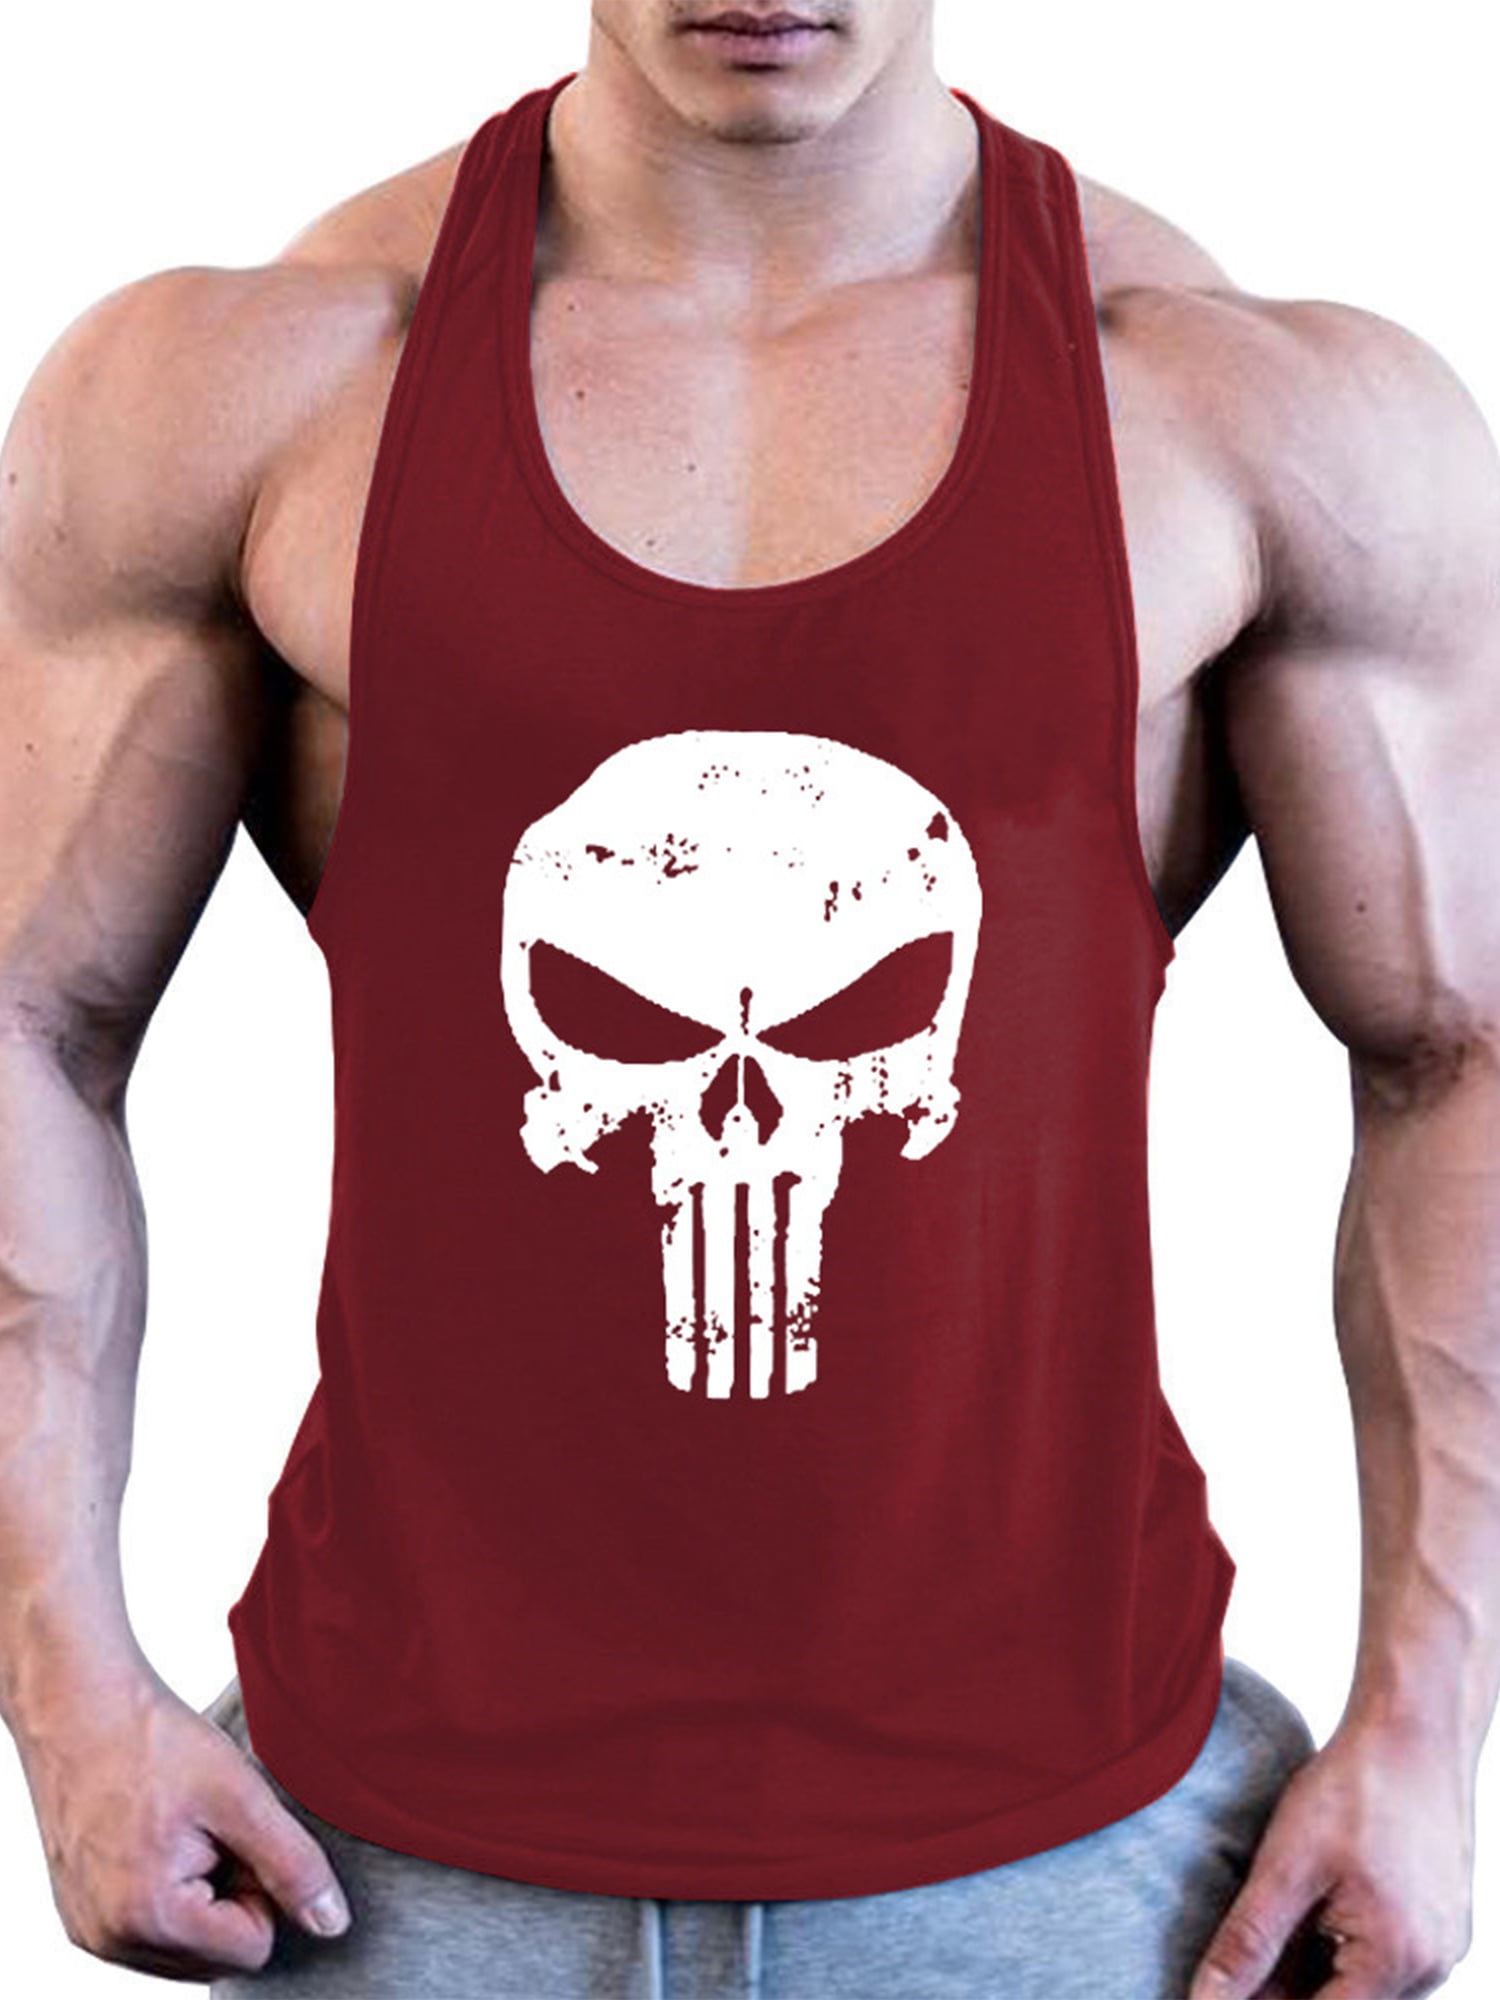 Details about   Men Gym Sports Vest Tank Tops Exercise Fitness Breathable Base Layer Tee Shirts 